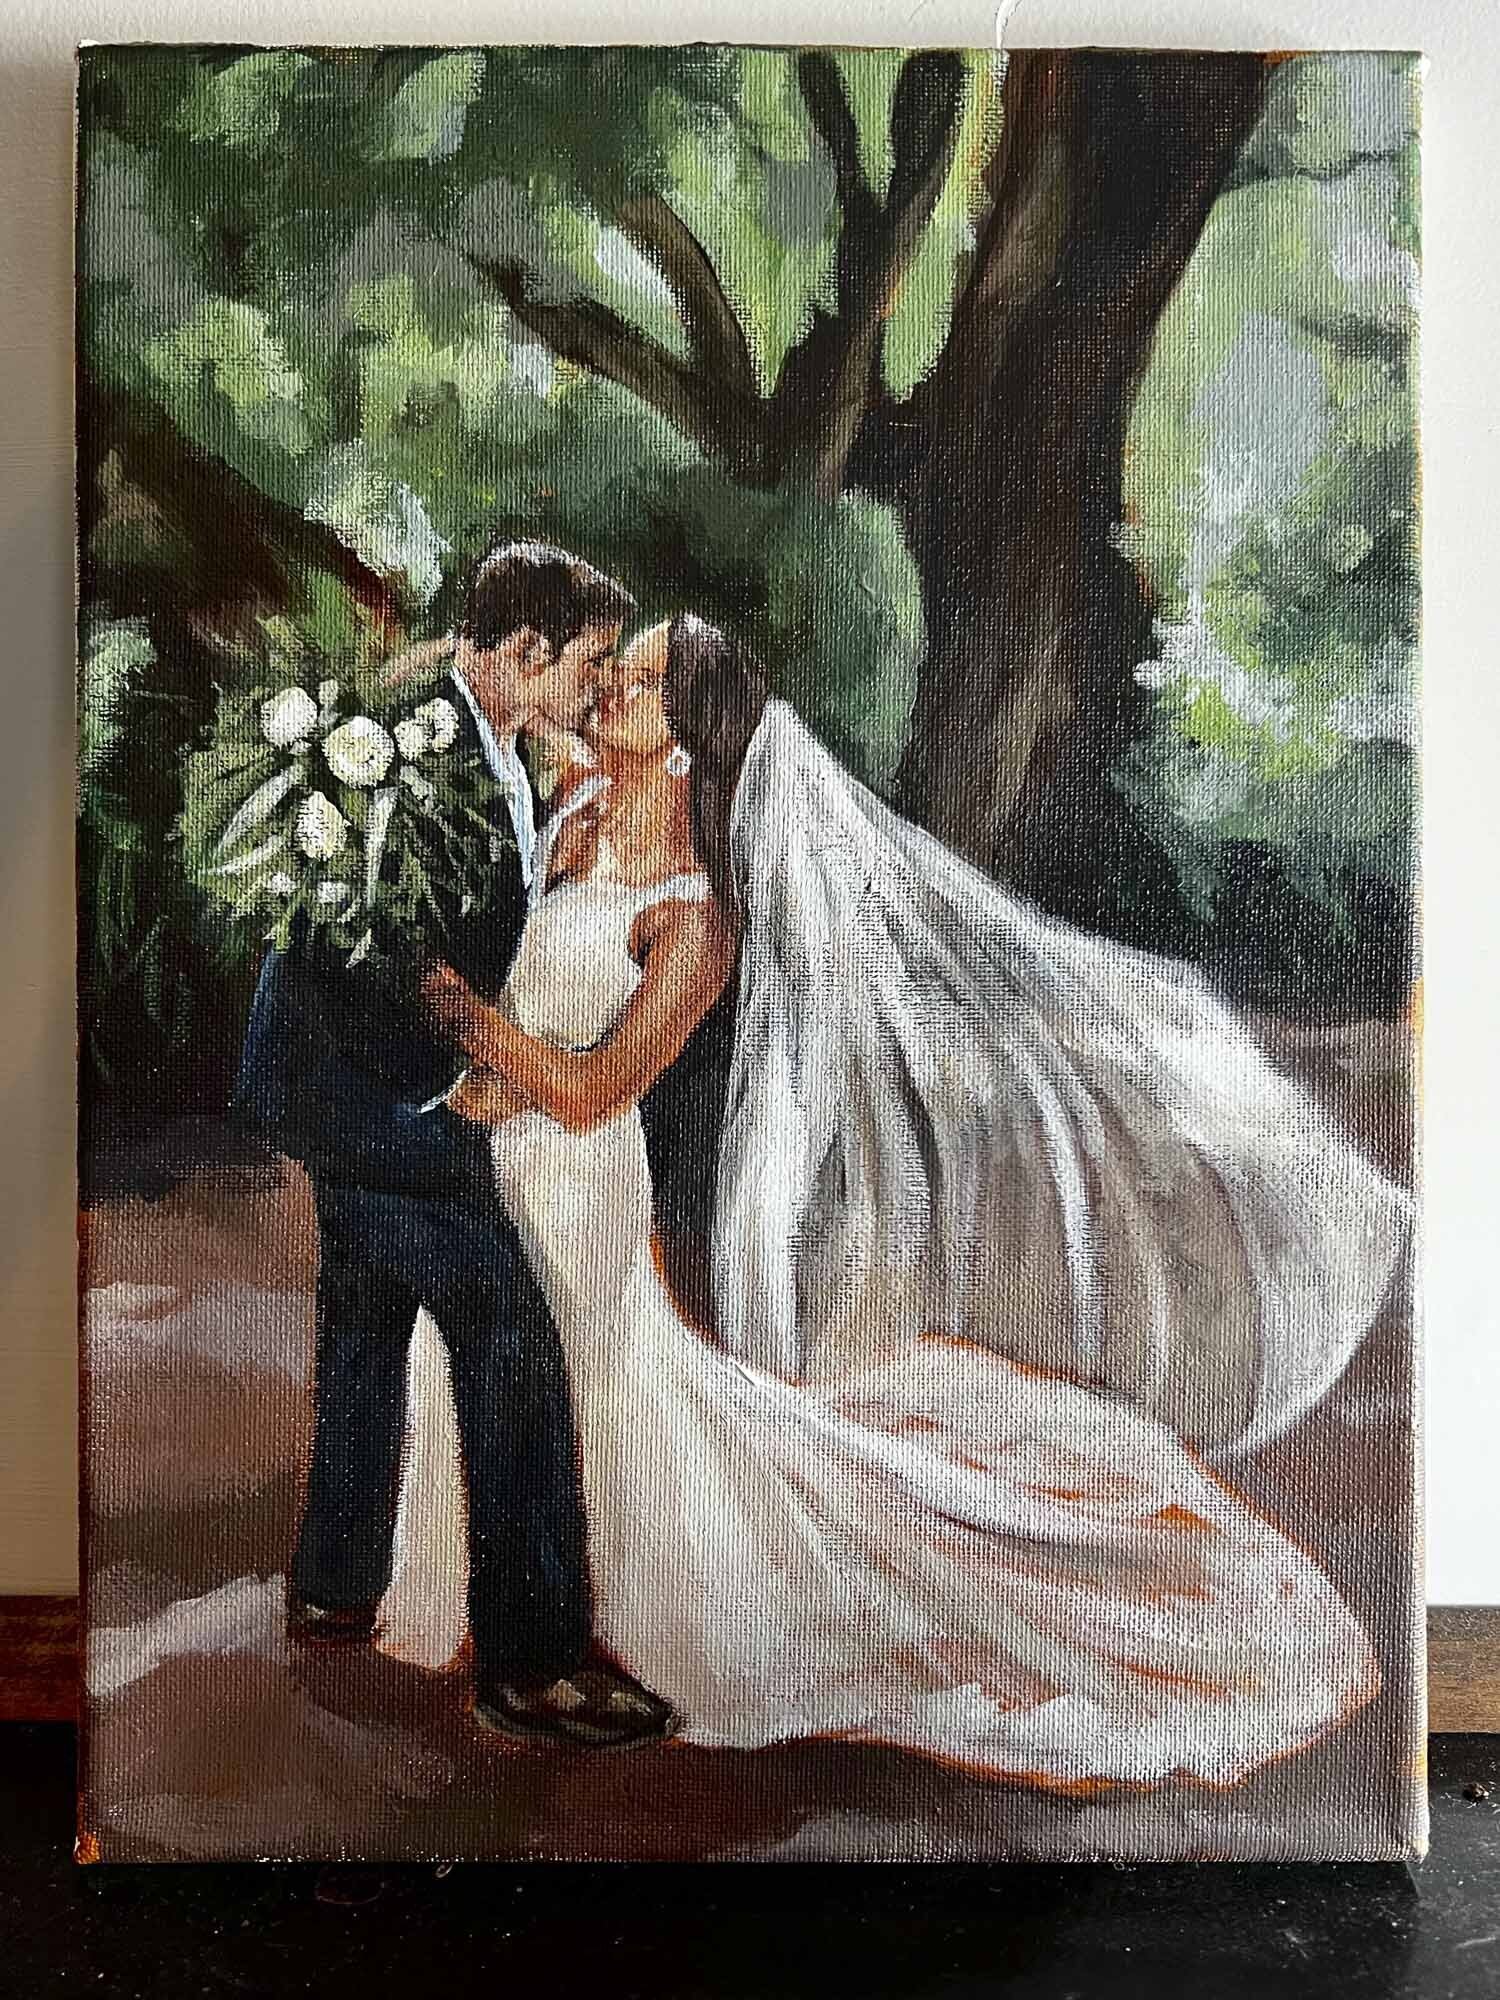 painting-of-bride-and-groom-kissing